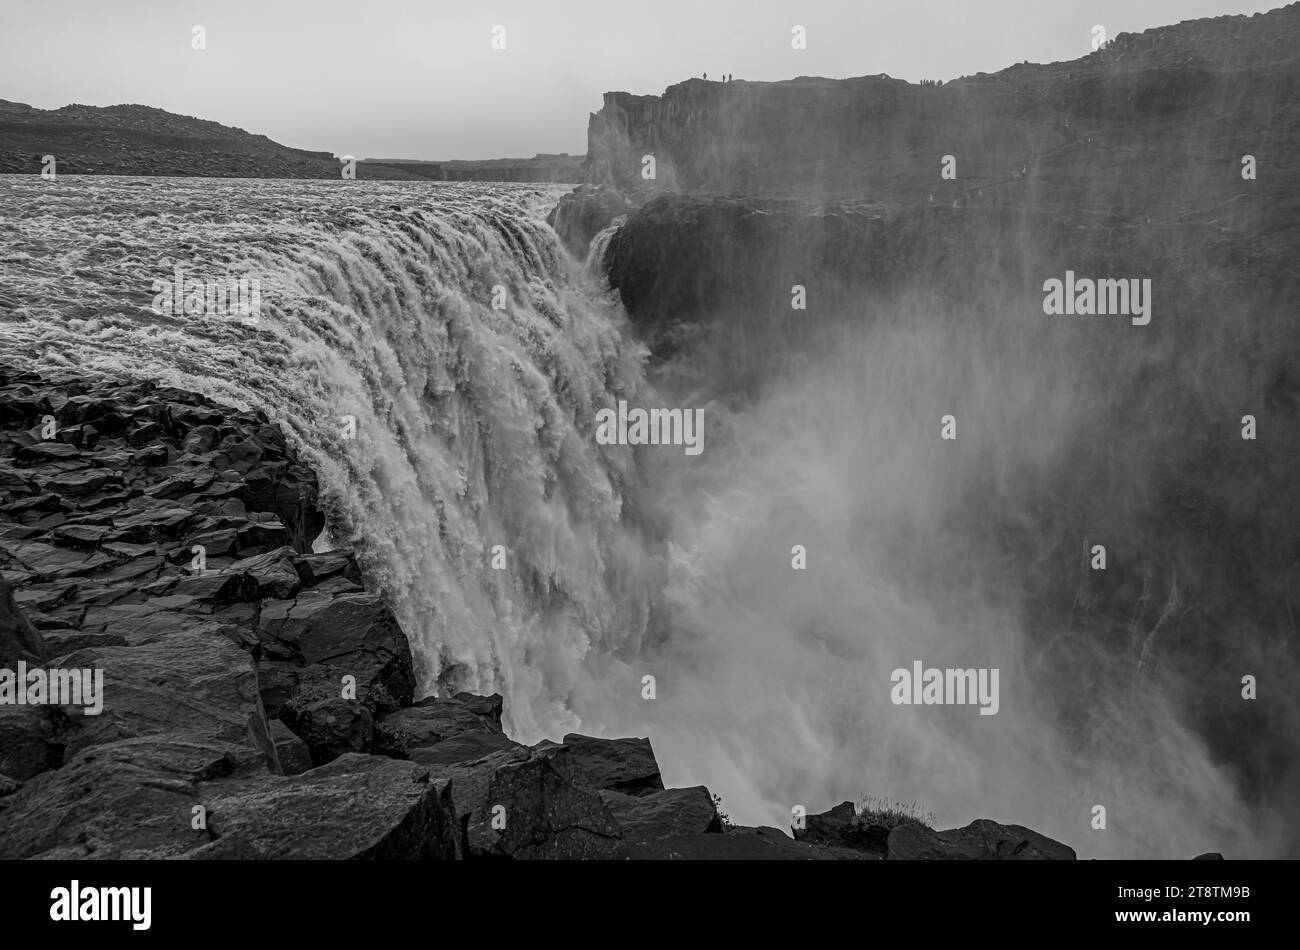 Dettifoss waterfall, Vatnajokull National Park, northeast Iceland: Dettifoss is a waterfall found in North Iceland and ranks as the second most powerf Stock Photo